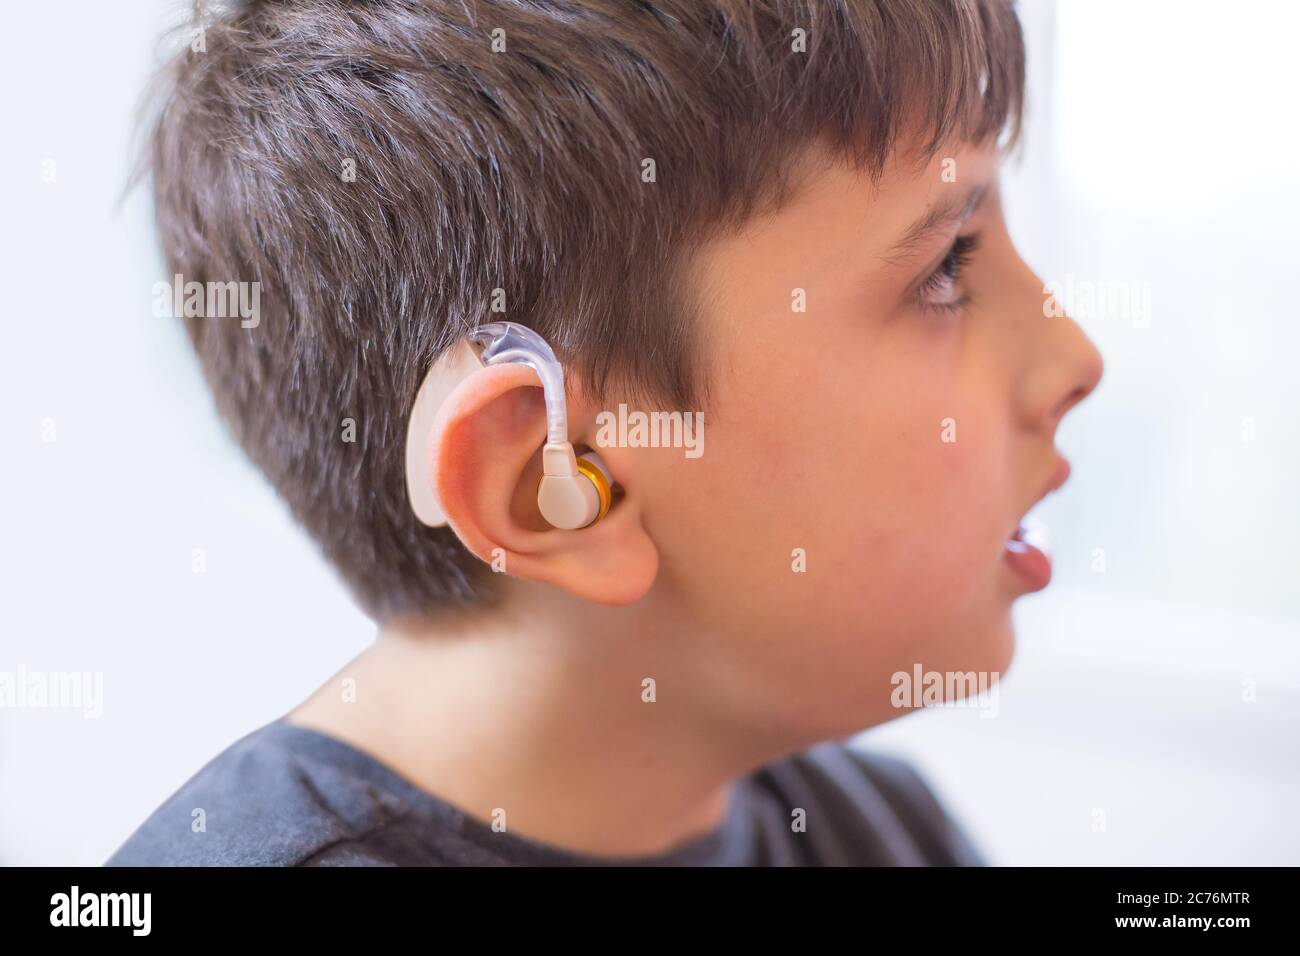 young boy using hearing aid Stock Photo